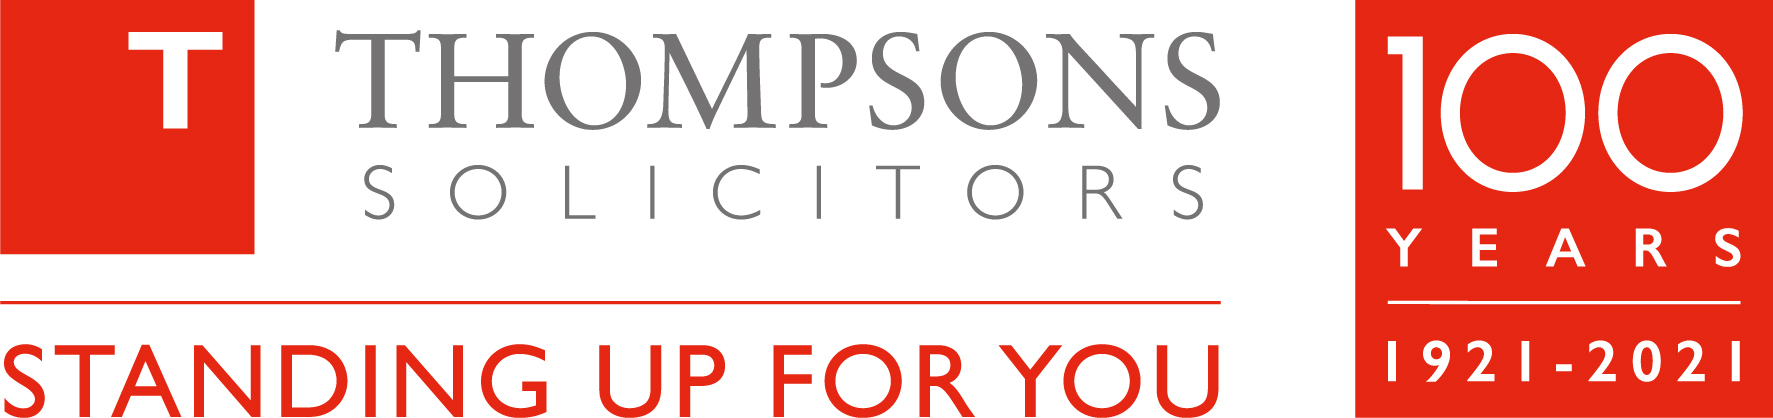 Thompsons Solicitors 100 years logo.